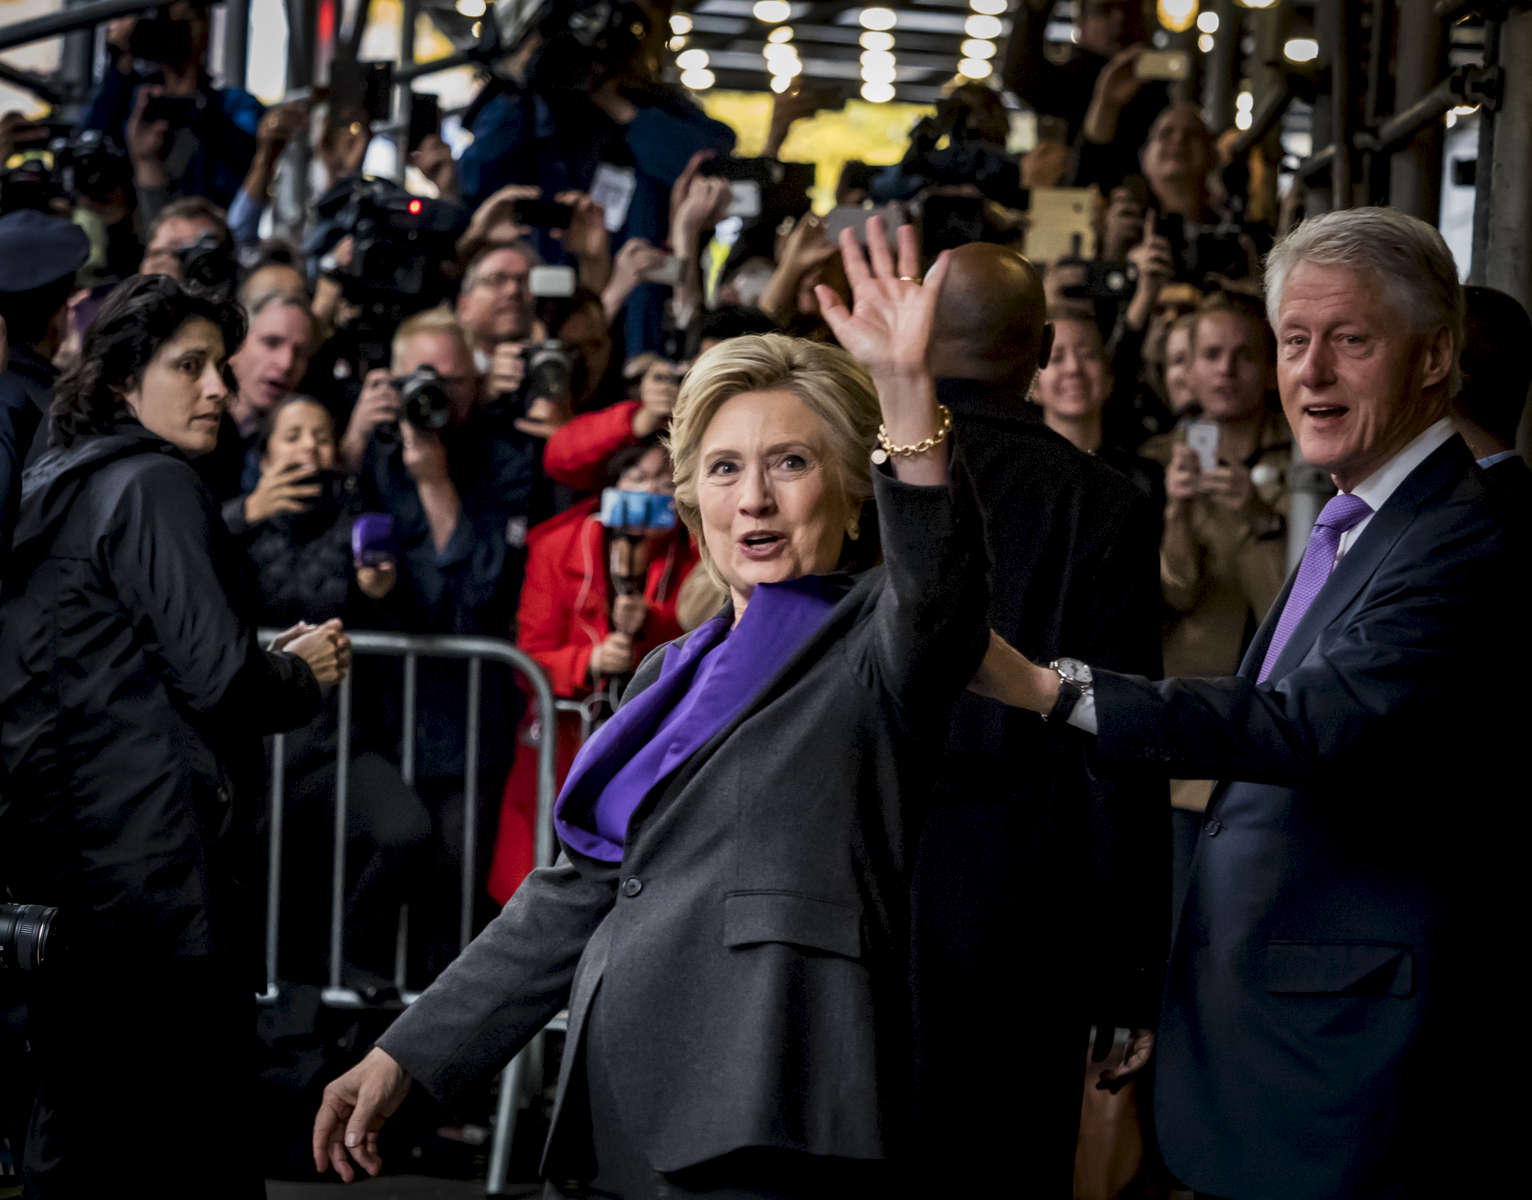 Democratic Presidential Candidate Hillary Clinton was joined by husband former President Bill Clinton after delivering her concession speech inside The New Yorker Hotel located at 481 8th Avenue in Manhattan on Wednesday, November 9, 2016.